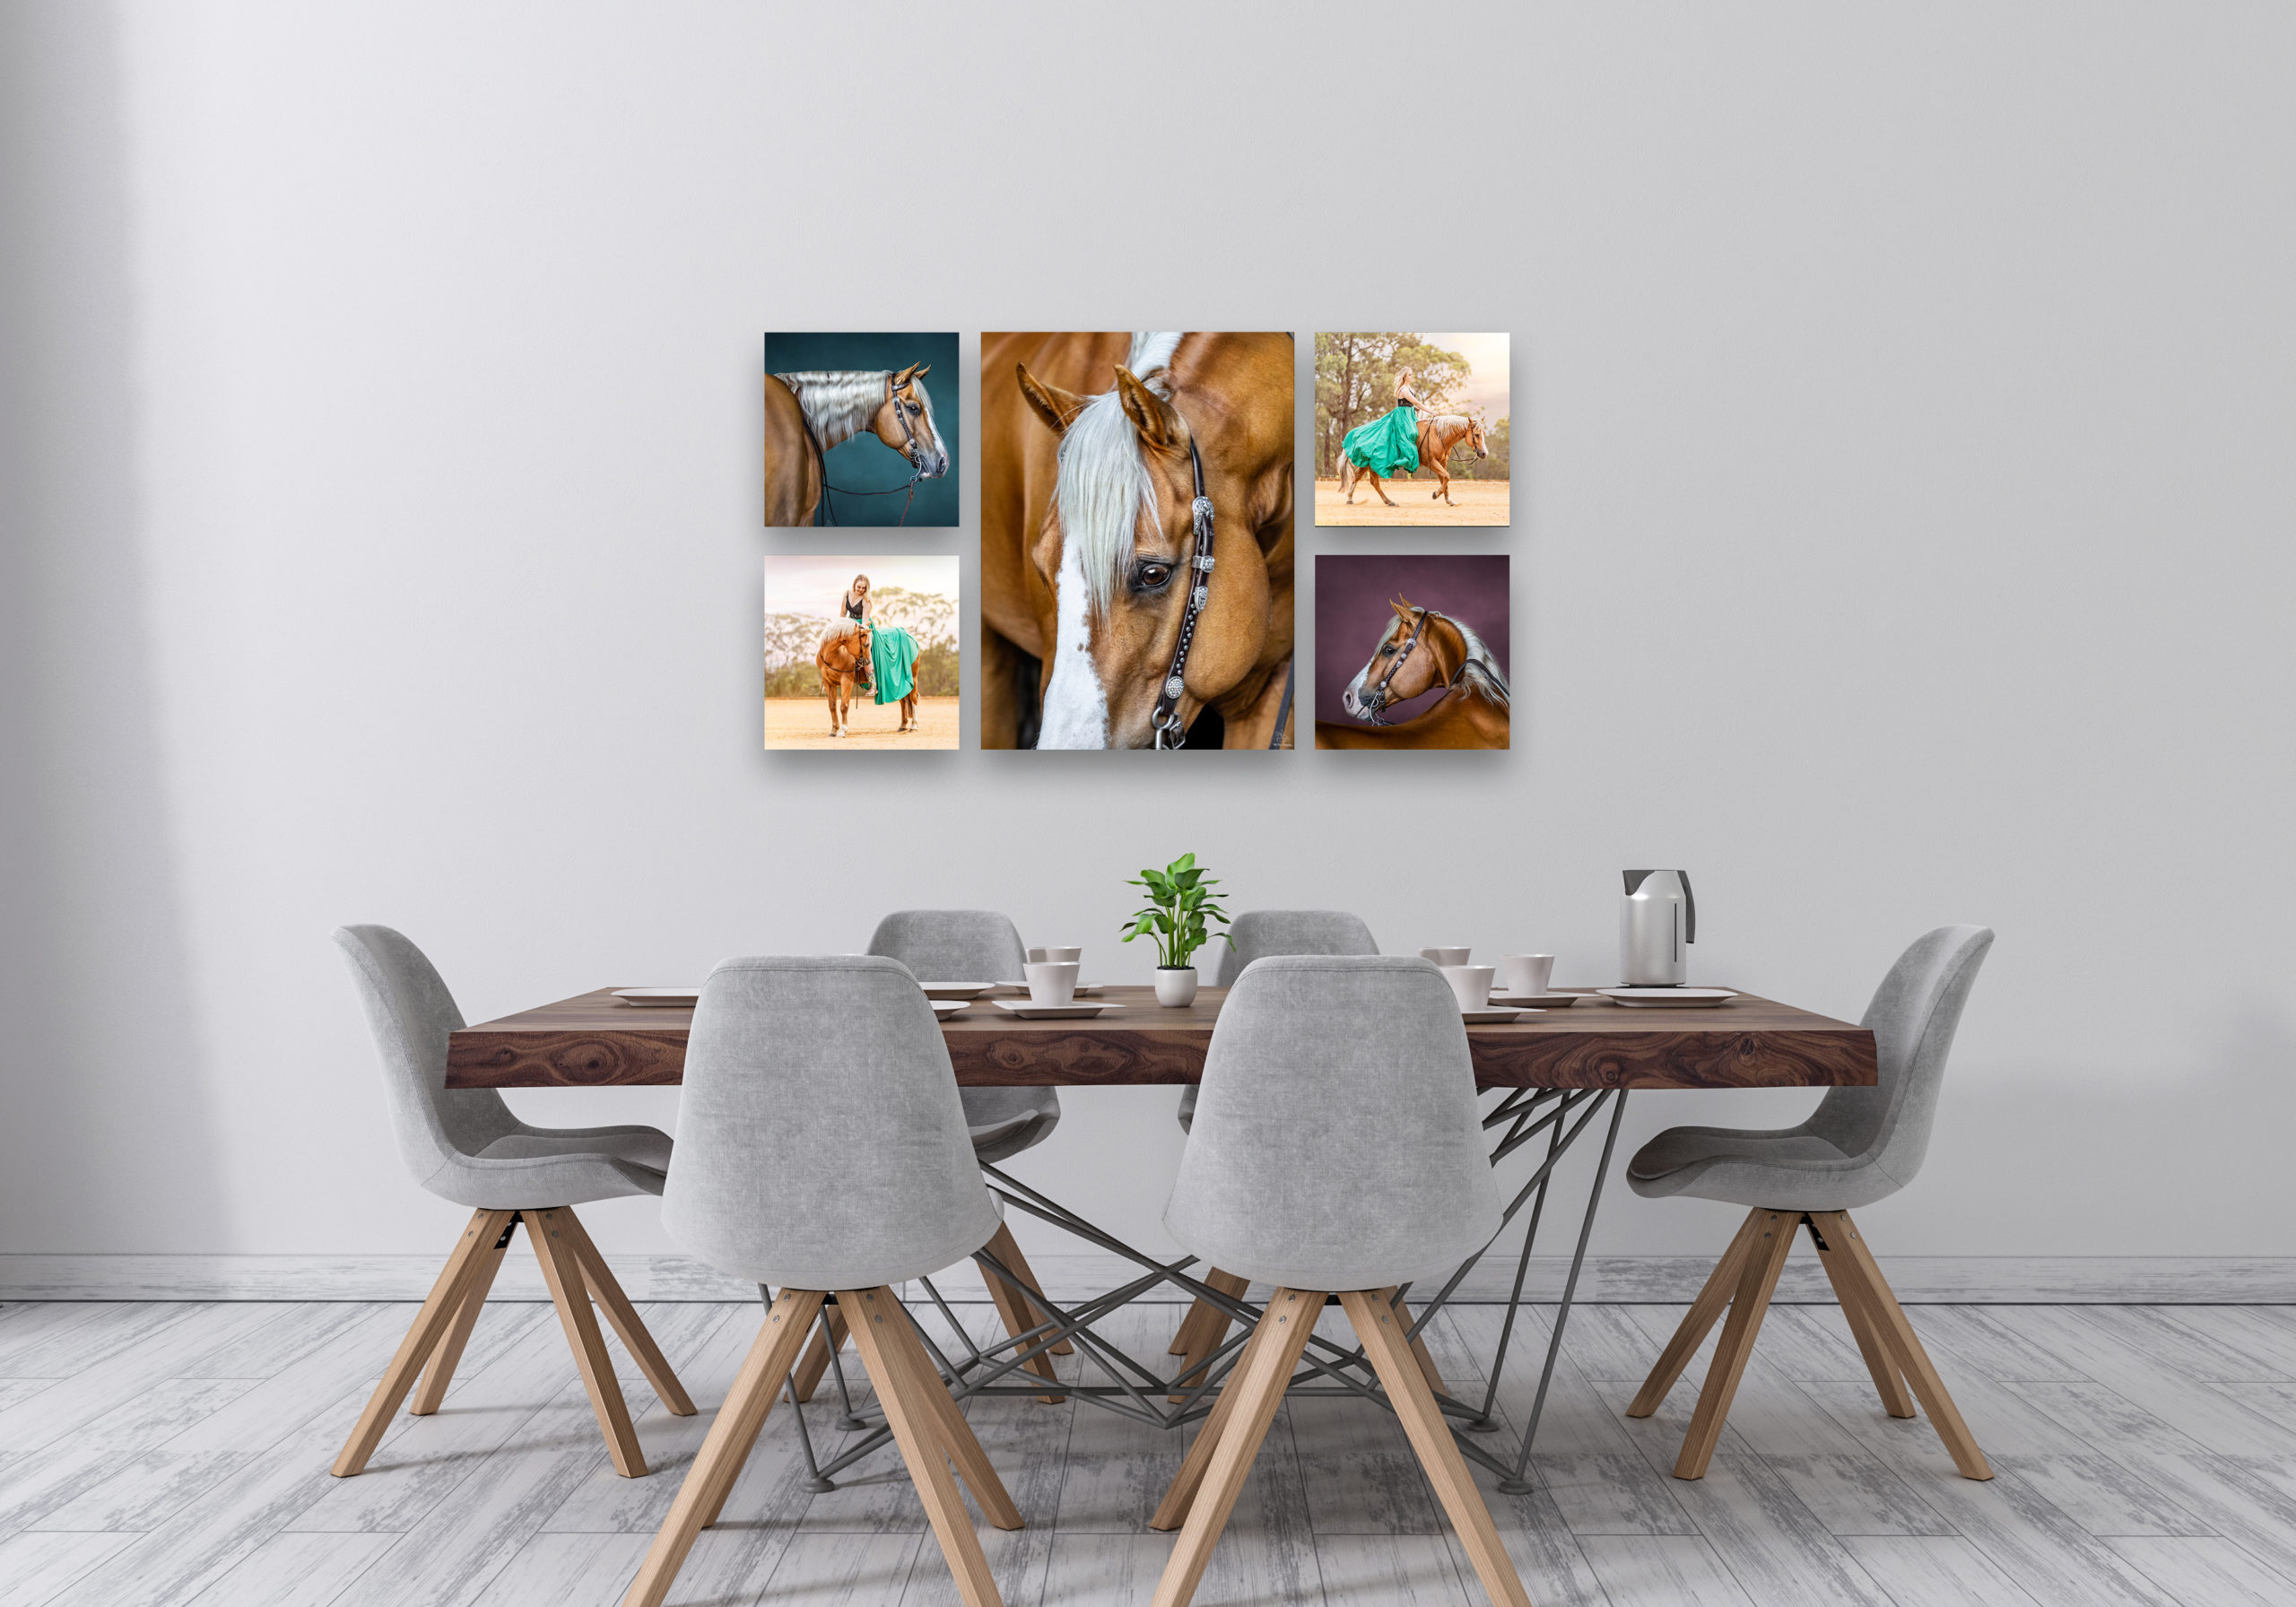 Equine Wall Art Gallery Collection in Dining Room